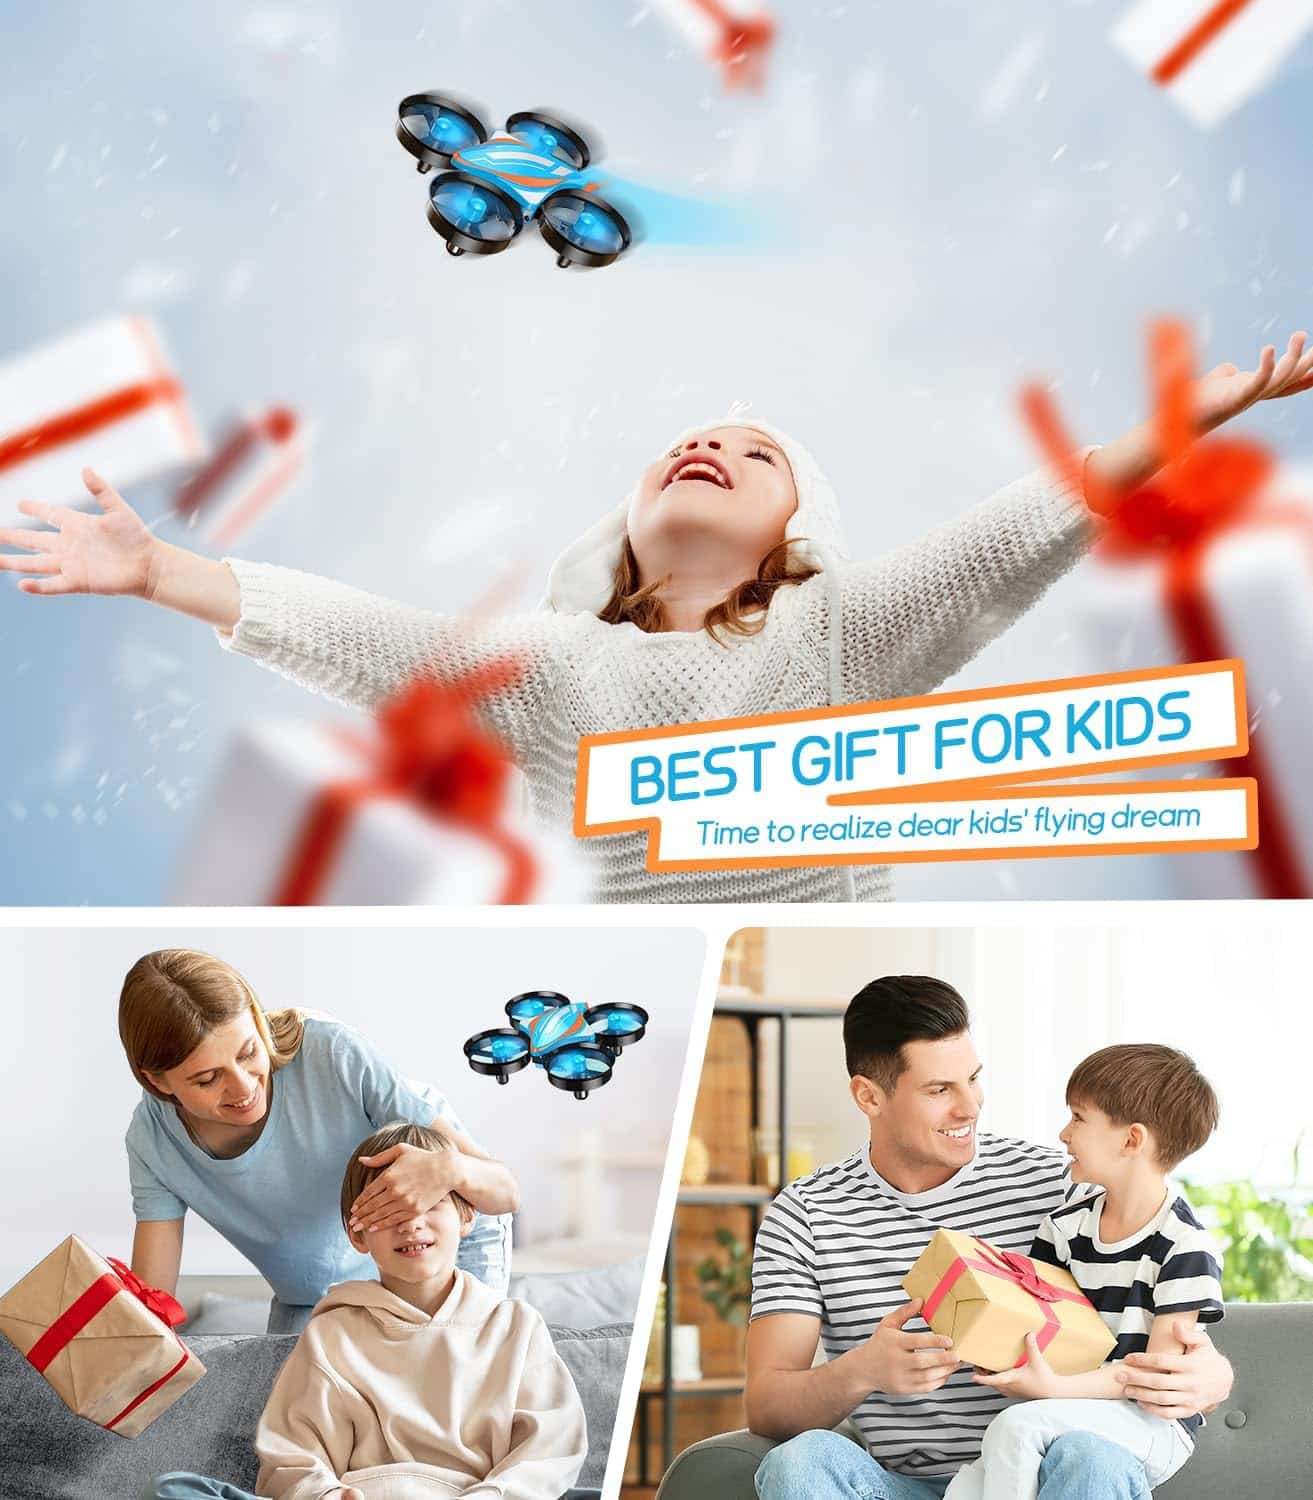 Orvina OV-18 Mini Drones for Kids and Adults: A Fun and Safe Flying Experience